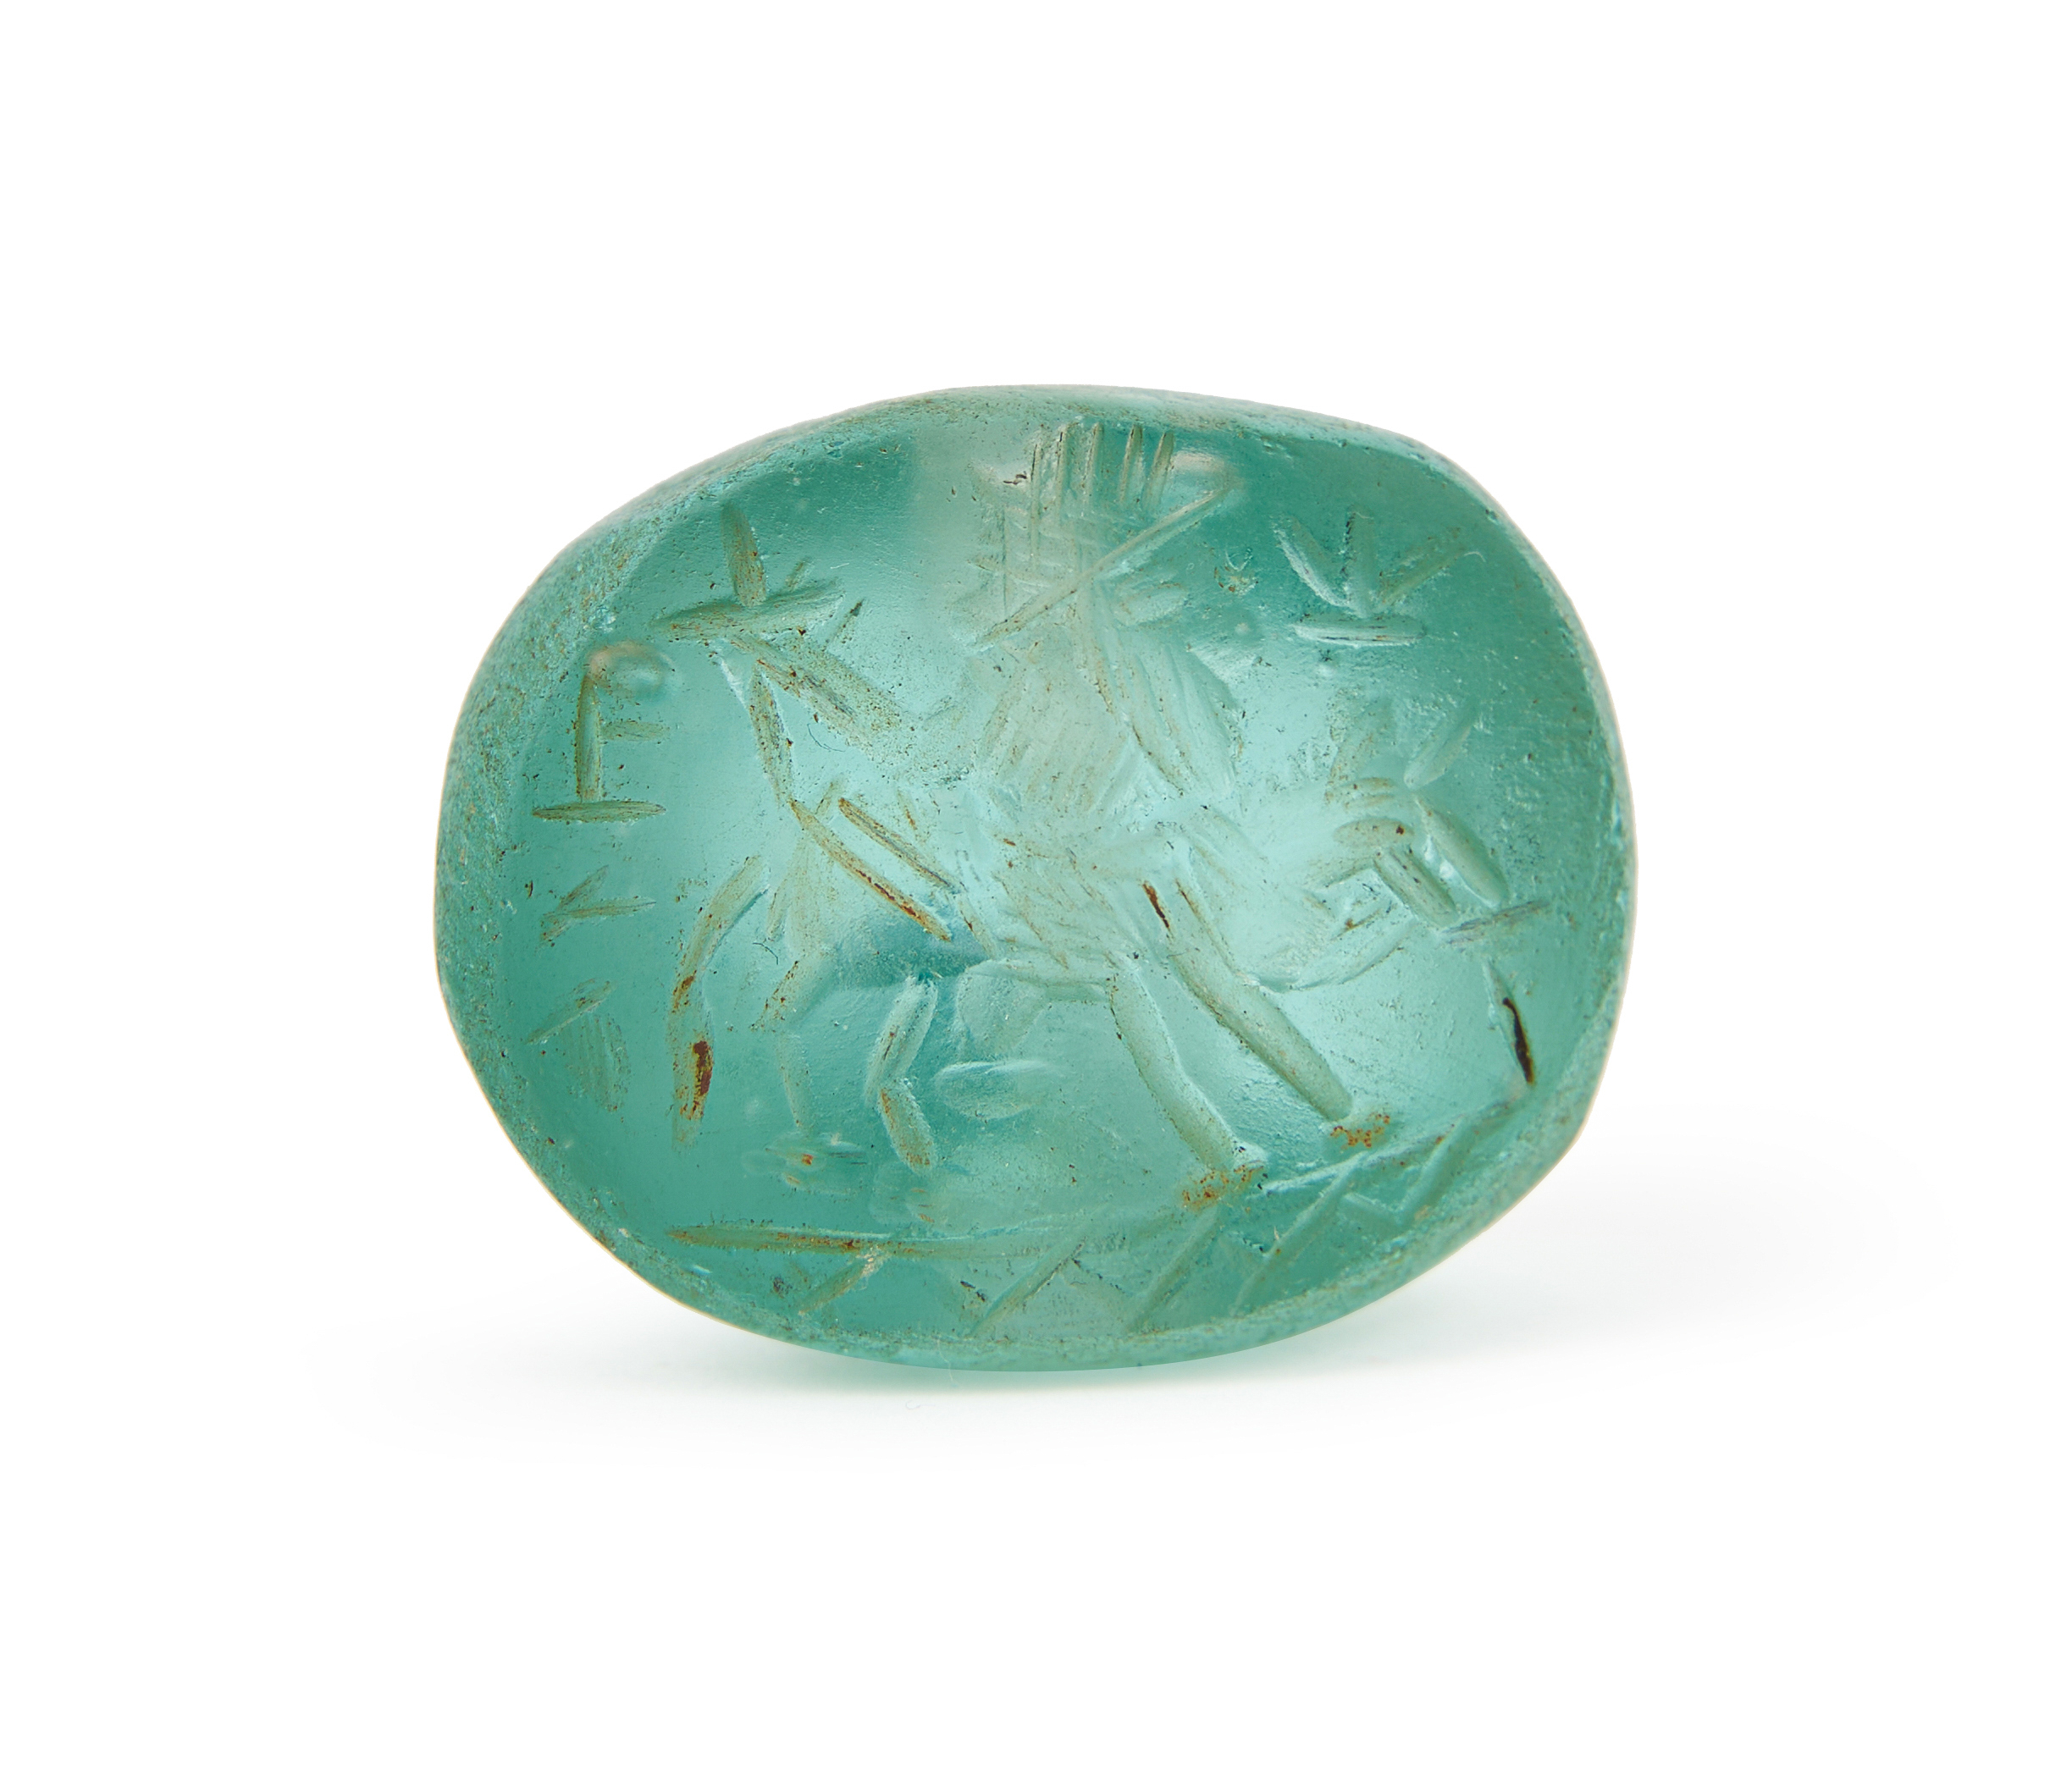 A LARGE BLUE GLASS SASANIAN STAMP SEAL CIRCA 4TH-5TH CENTURY A.D. - Image 2 of 3